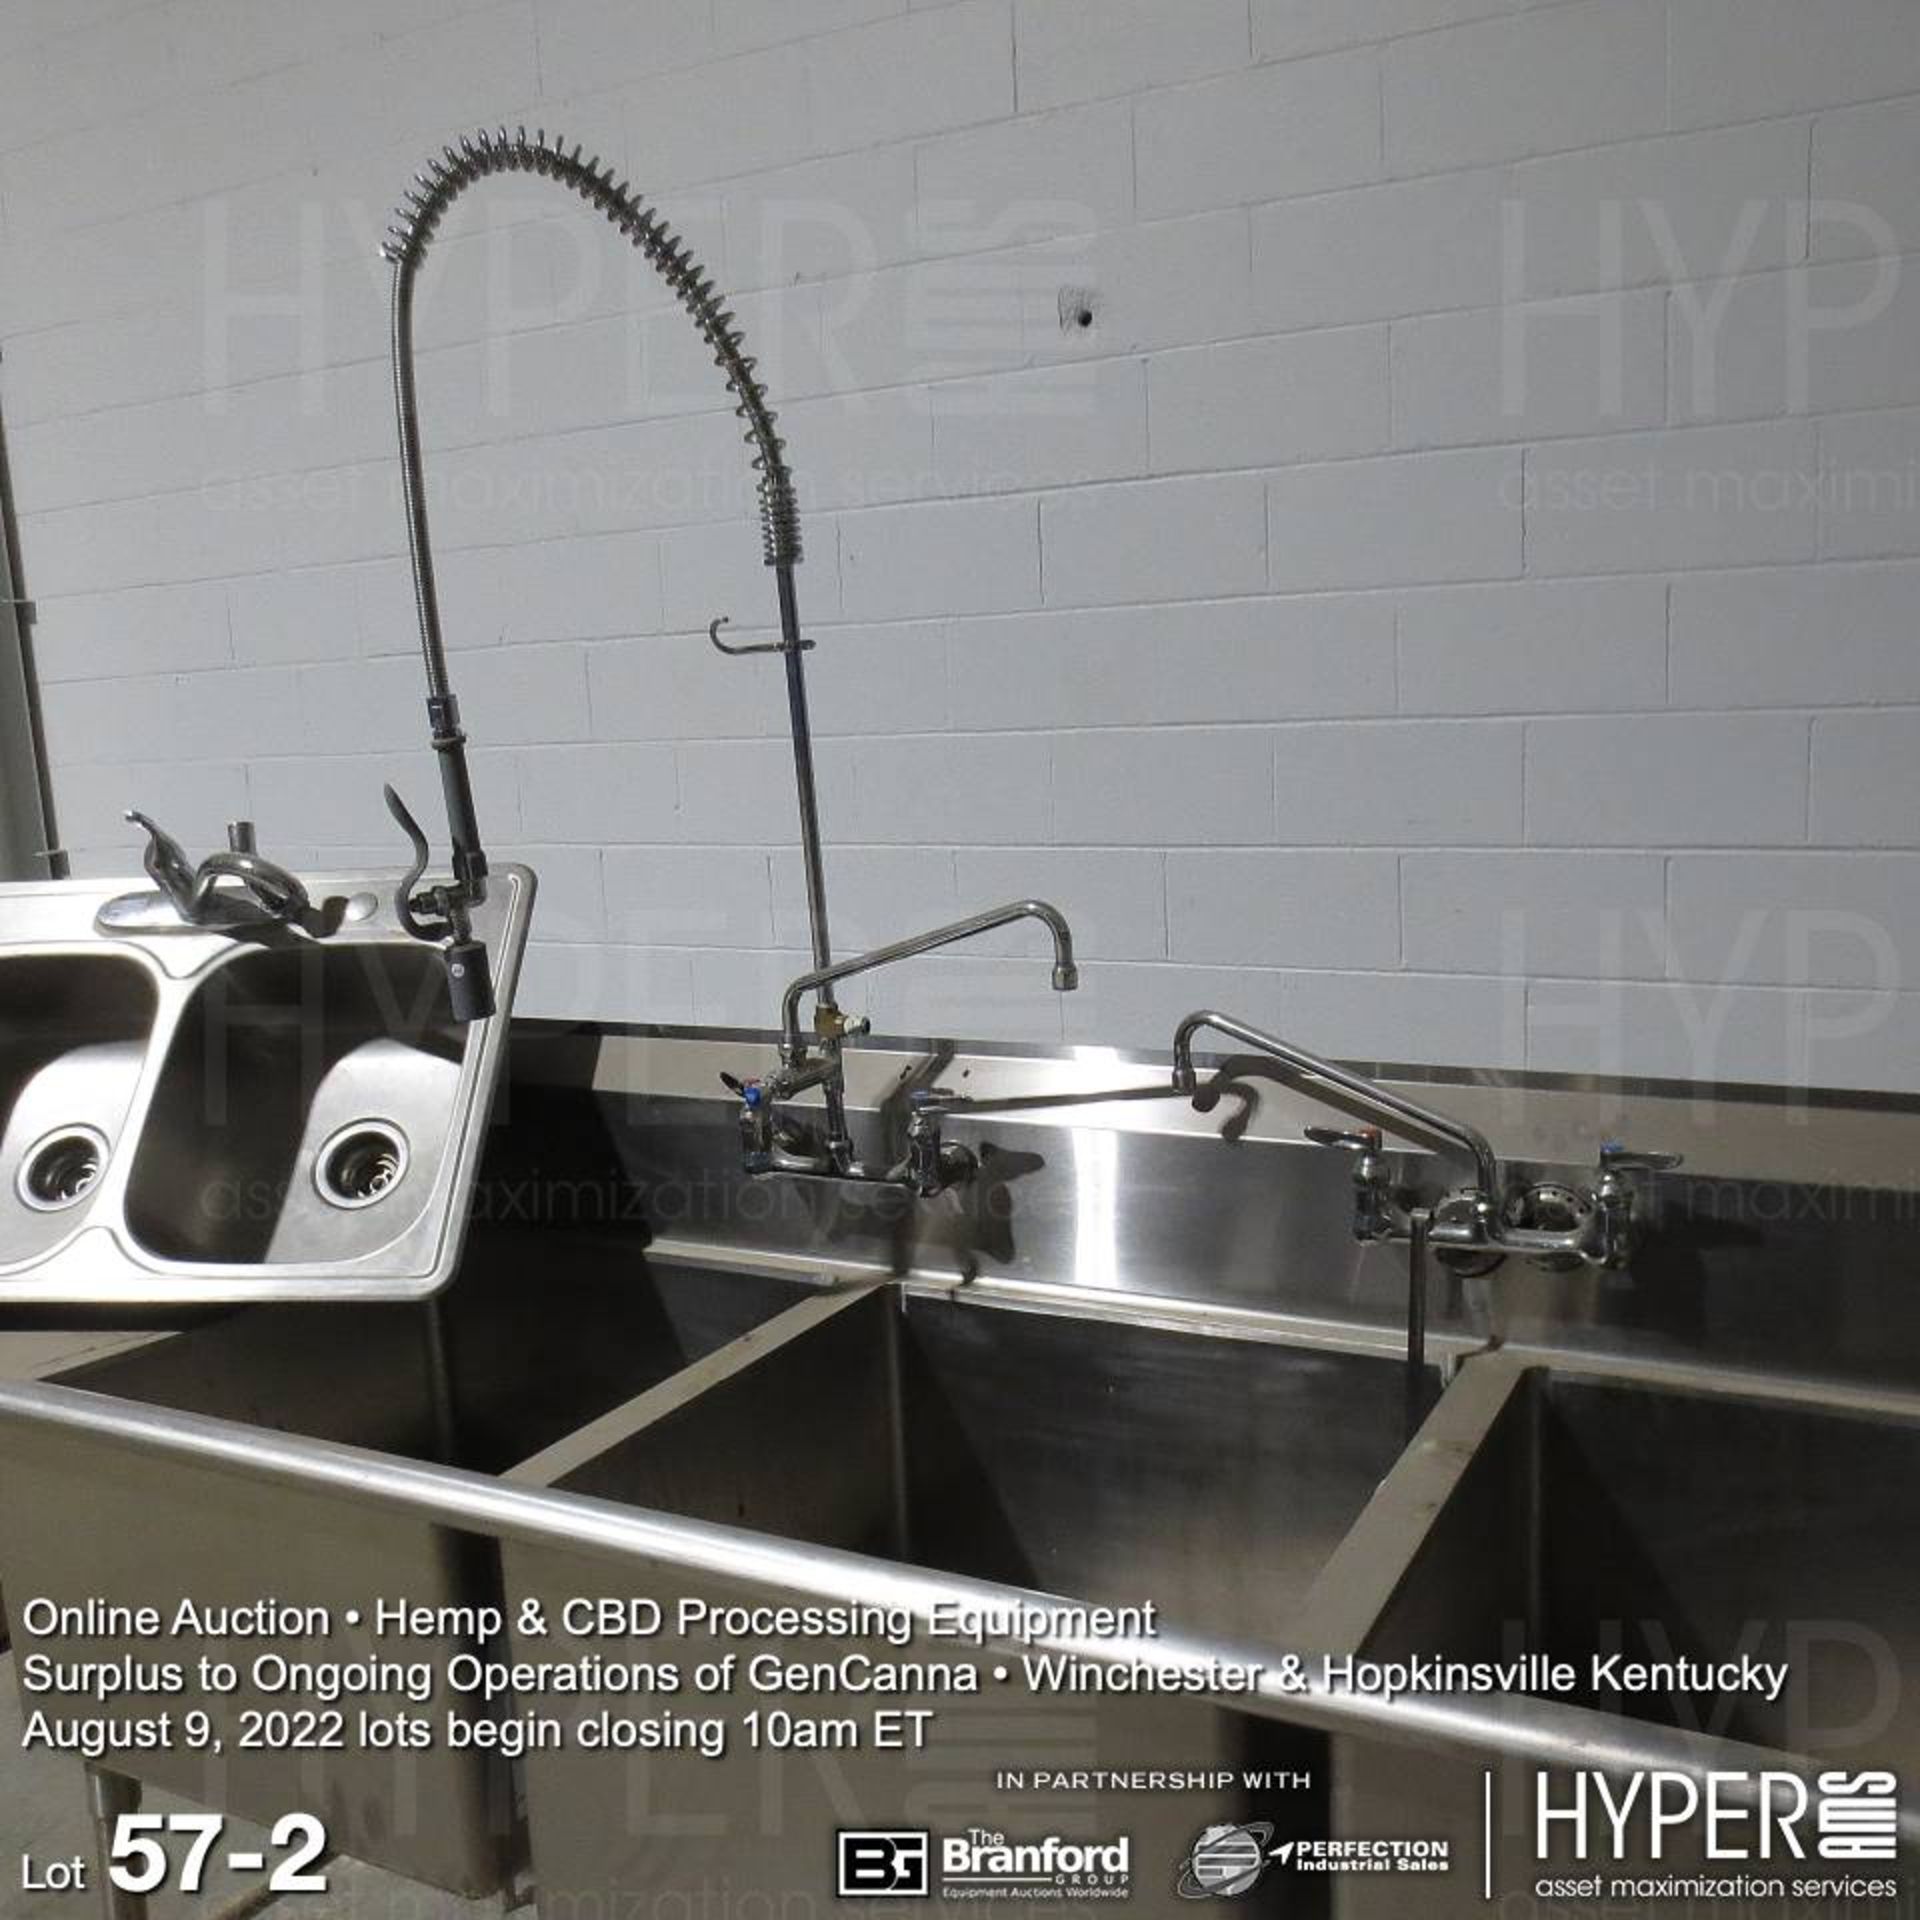 Stainless steel sinks; (1) 33" x 22" counter top; (1) 125" x 30" 3-sink-unit - Image 2 of 4